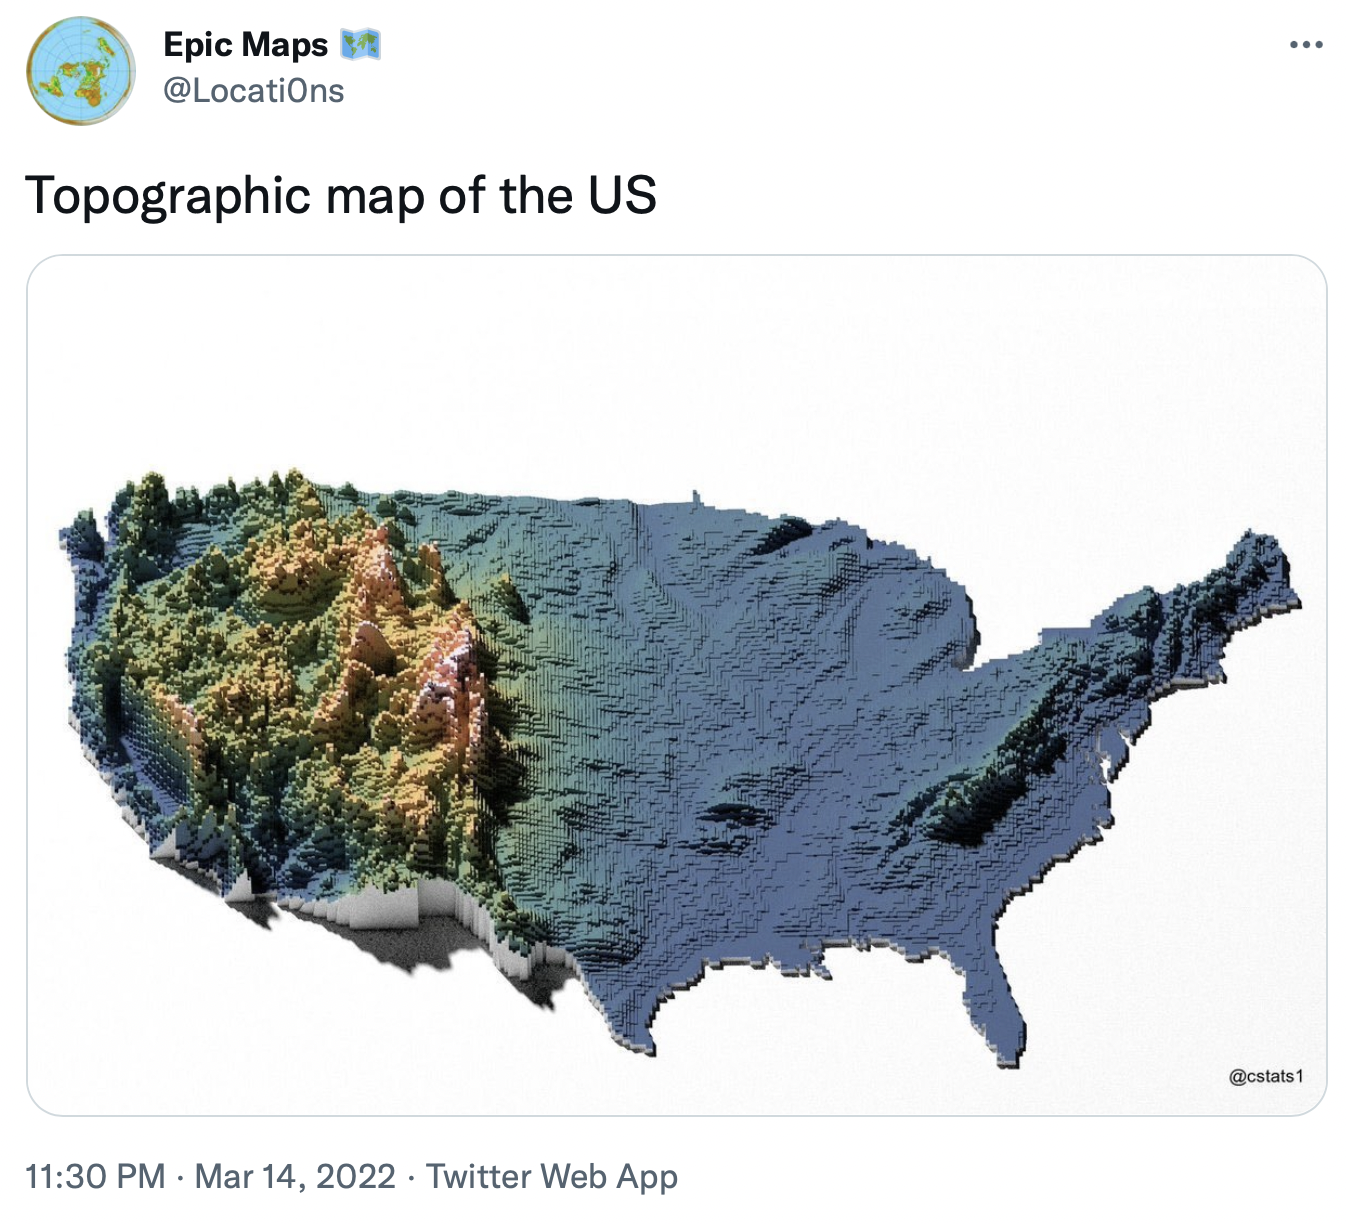 Via Epic Maps with USGS data.